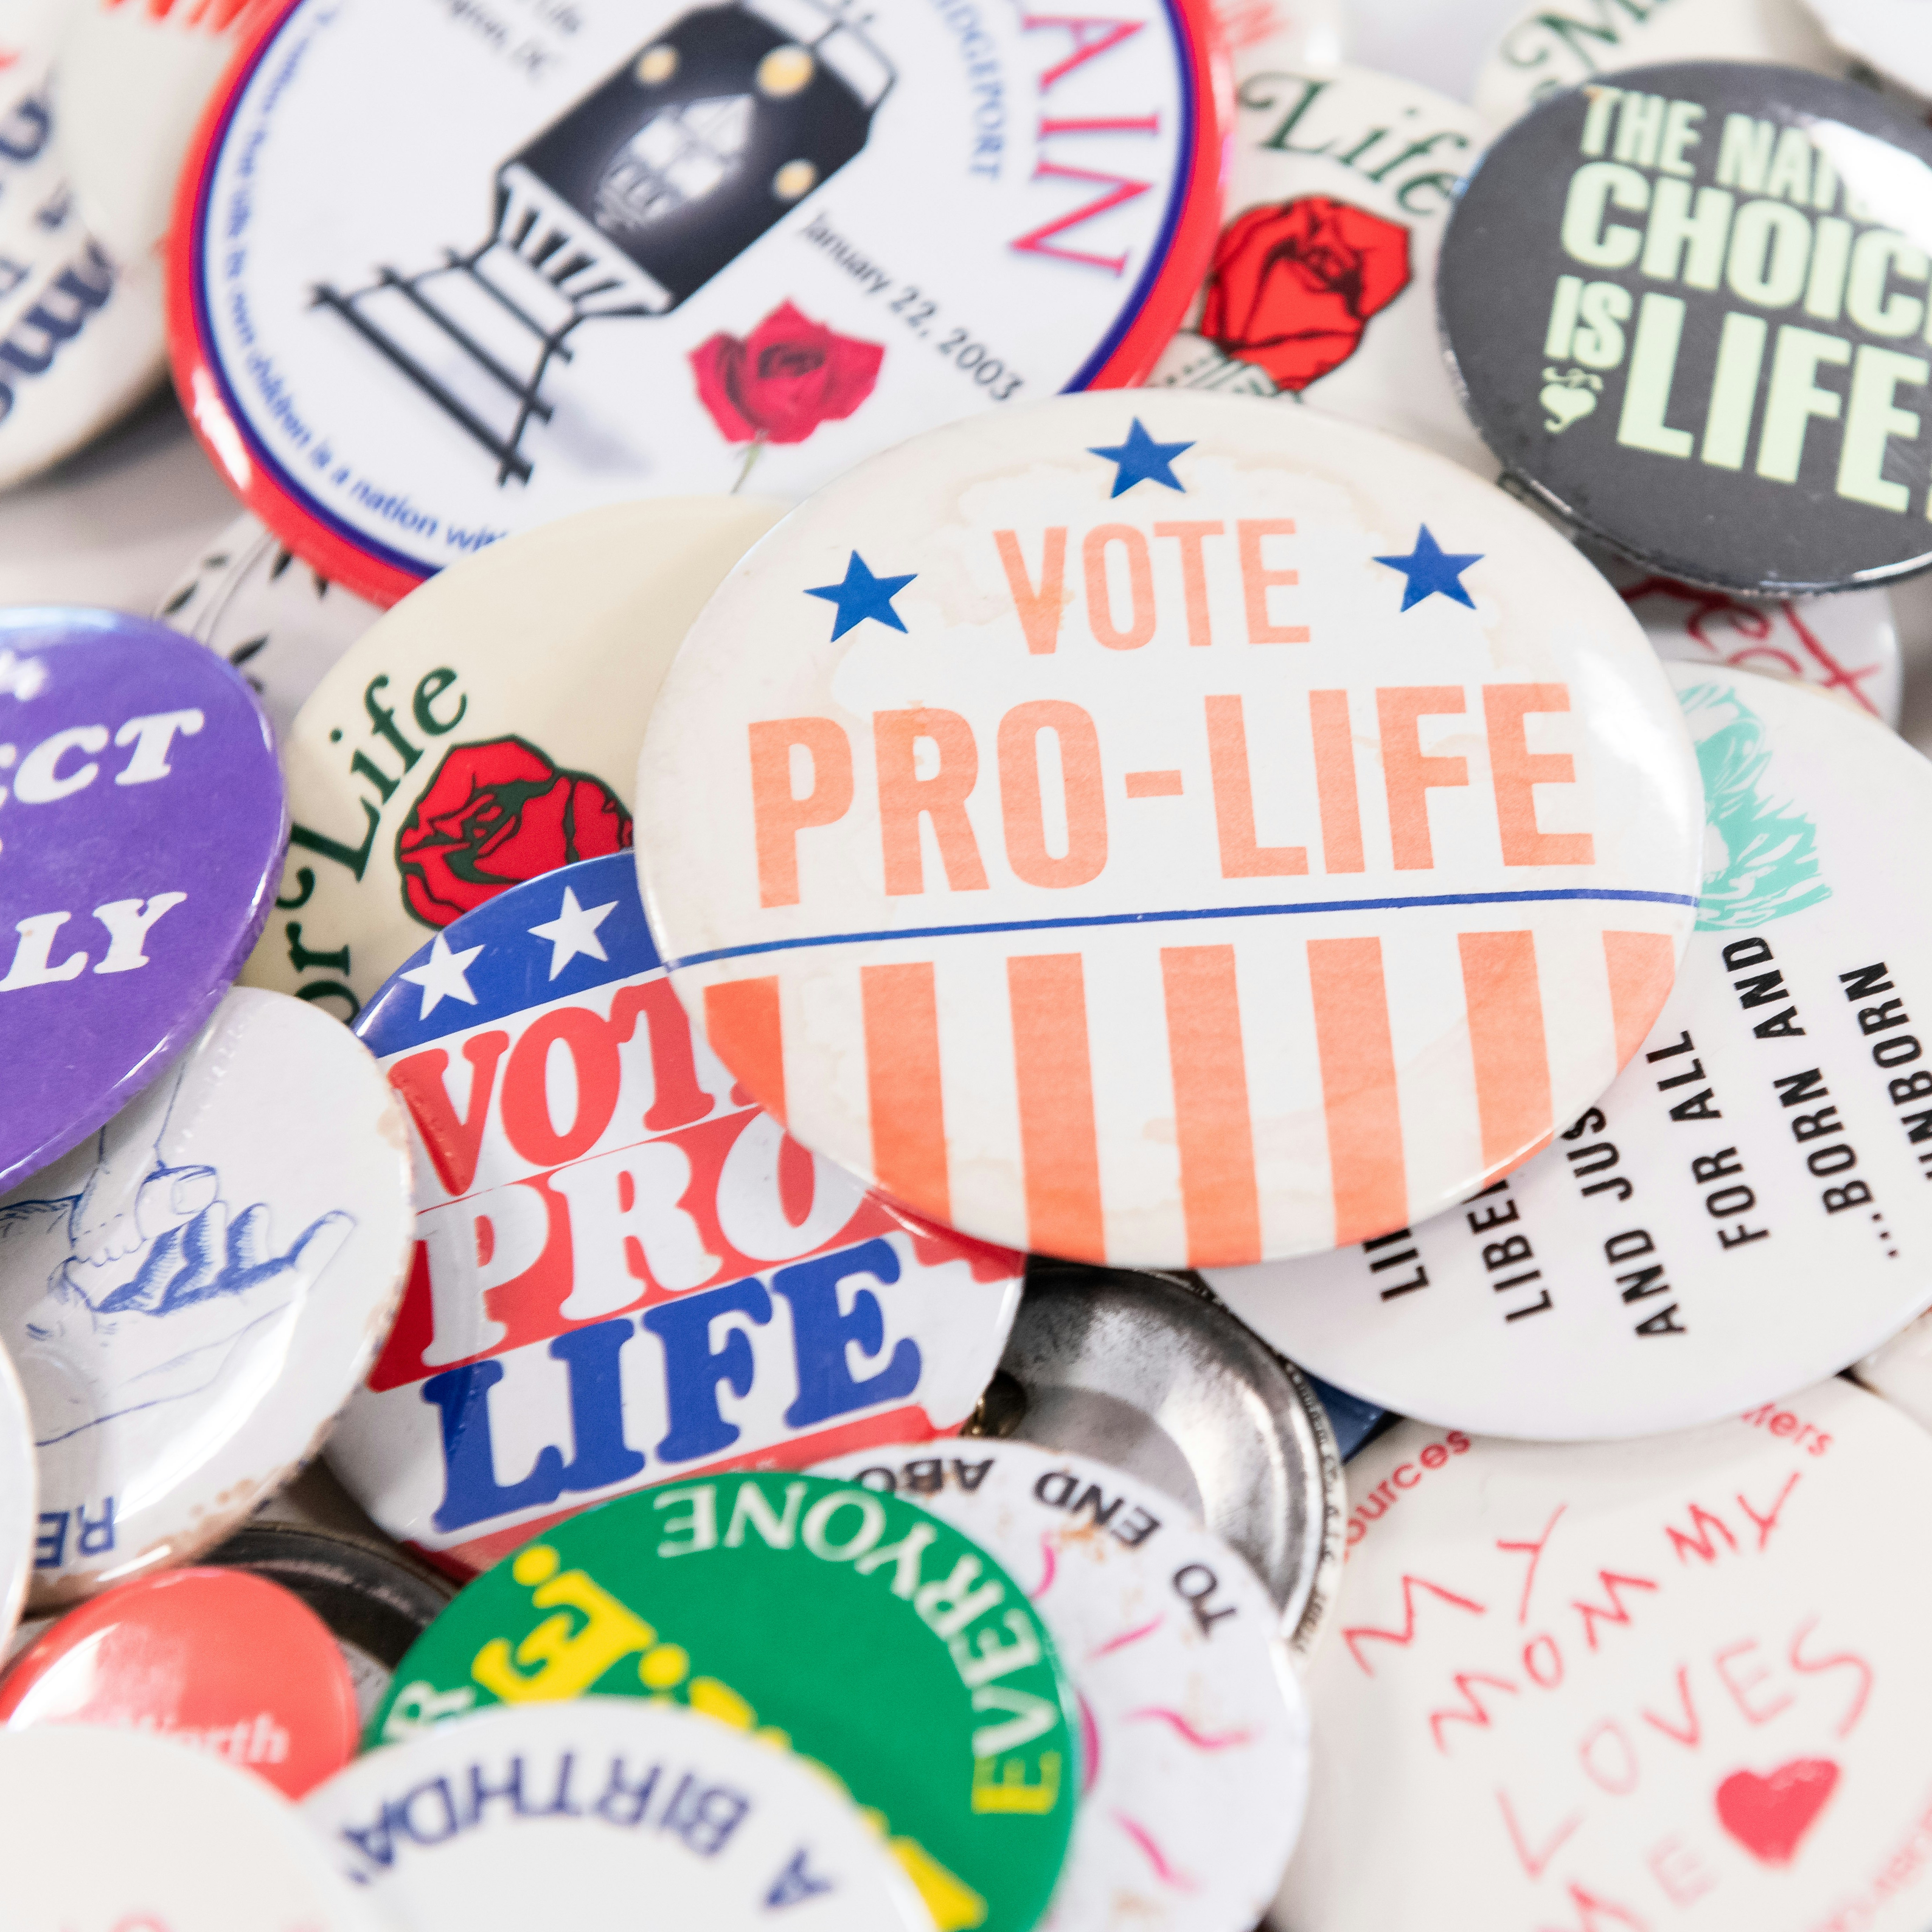 A pile of colorful buttons advertising pro-life slogans